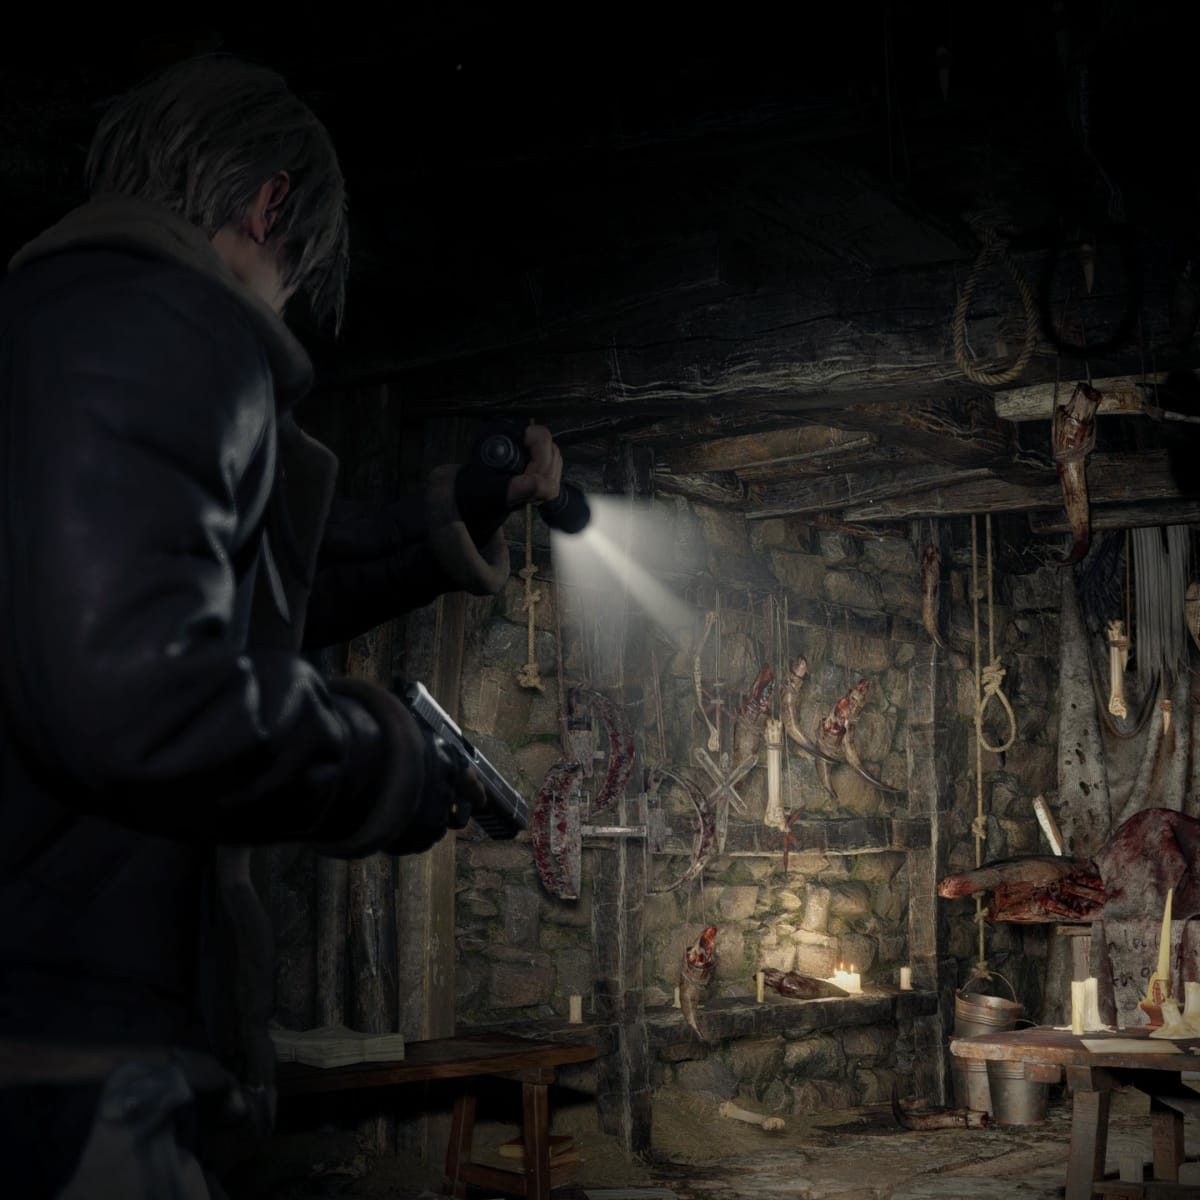 Capcom Resident Evil 4 Remake PC Requirements, Features Ray